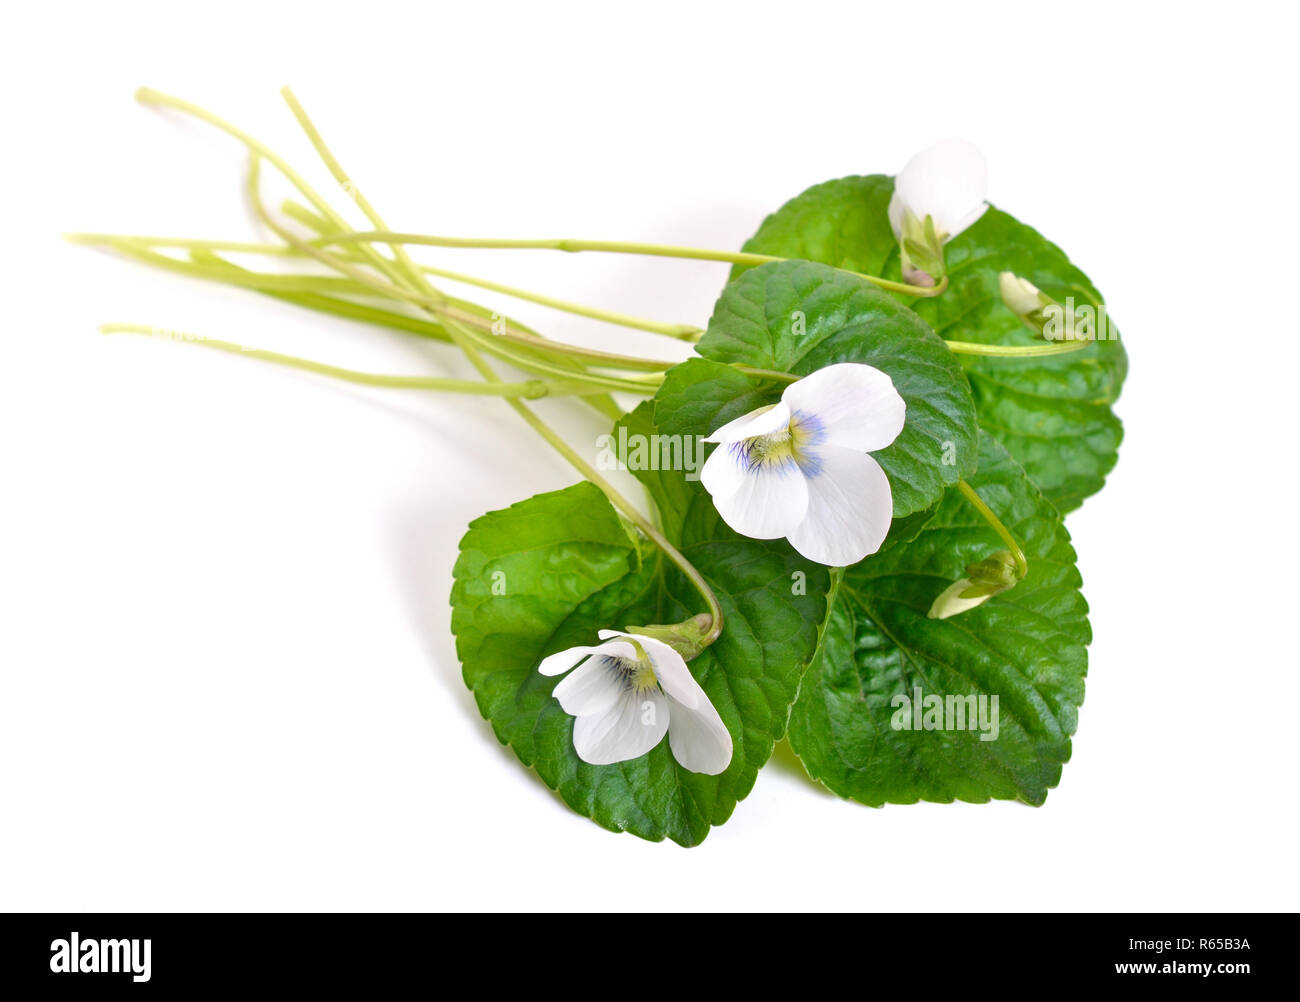 Viola alba, commonly known as white violet. Isolated. Stock Photo